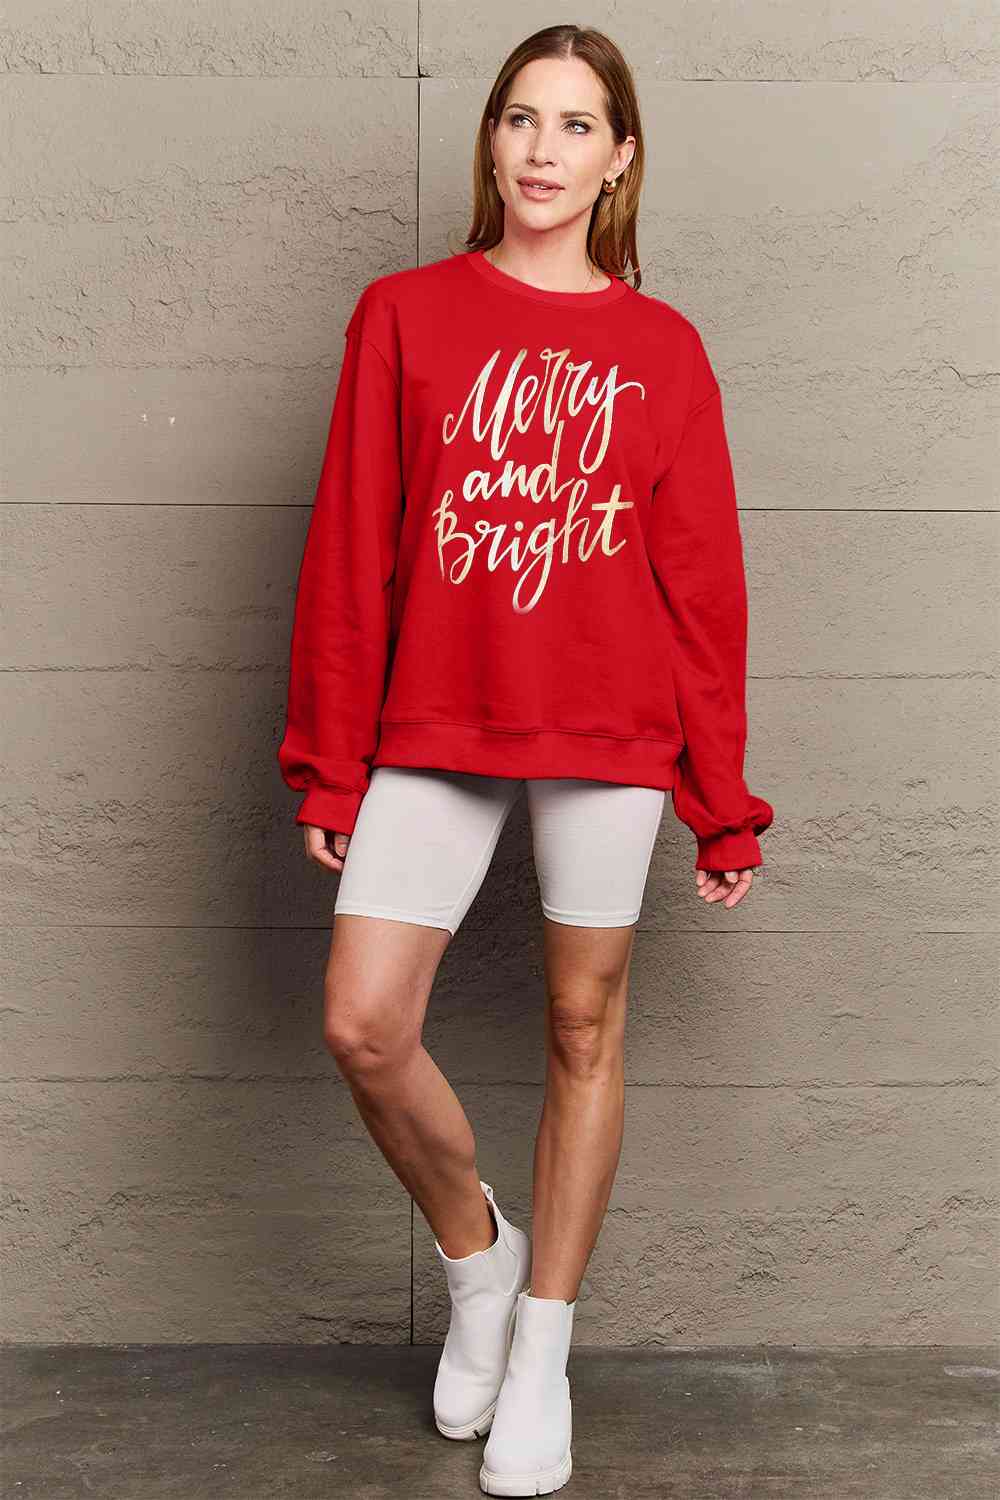 Simply Love Full Size MERRY AND BRIGHT Graphic Sweatshirt - Cotton Plus Cream